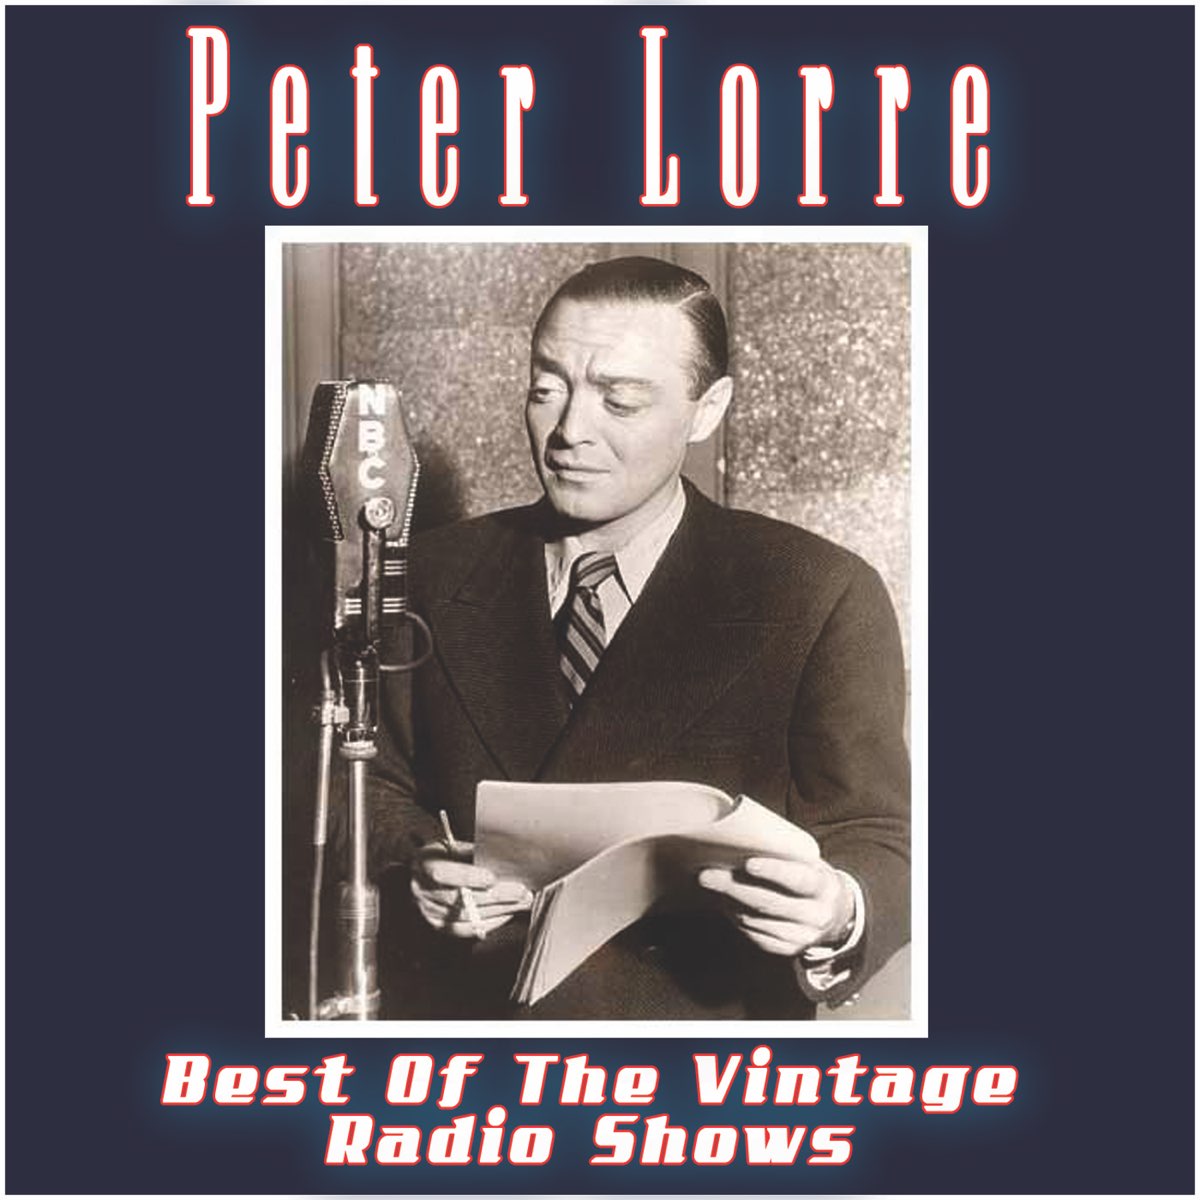 The Best of the Vintage Radio Shows - Album by Peter Lorre - Apple Music